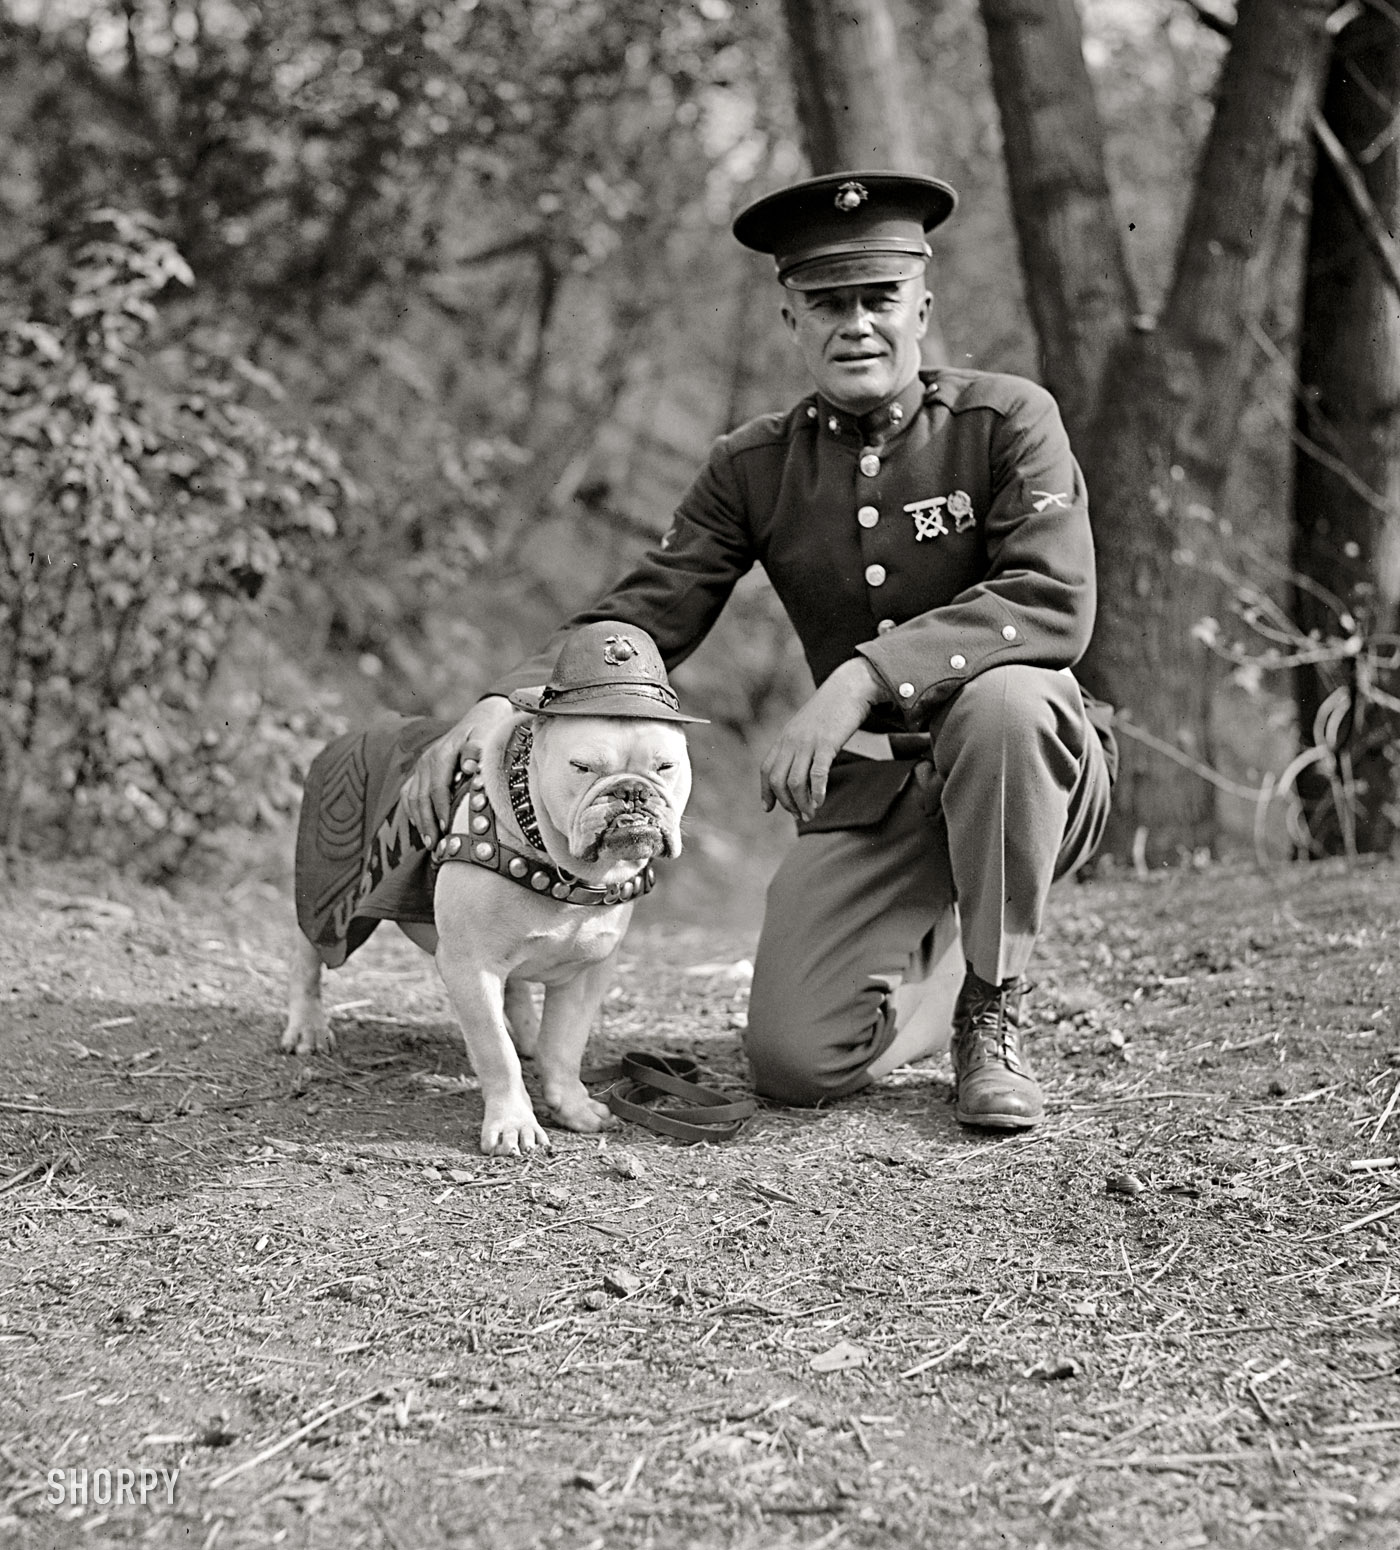 1925. "Sgt. Jiggs." The Marine Corps mascot in Washington, D.C., with an actual Marine. National Photo Company Collection glass negative. View full size.